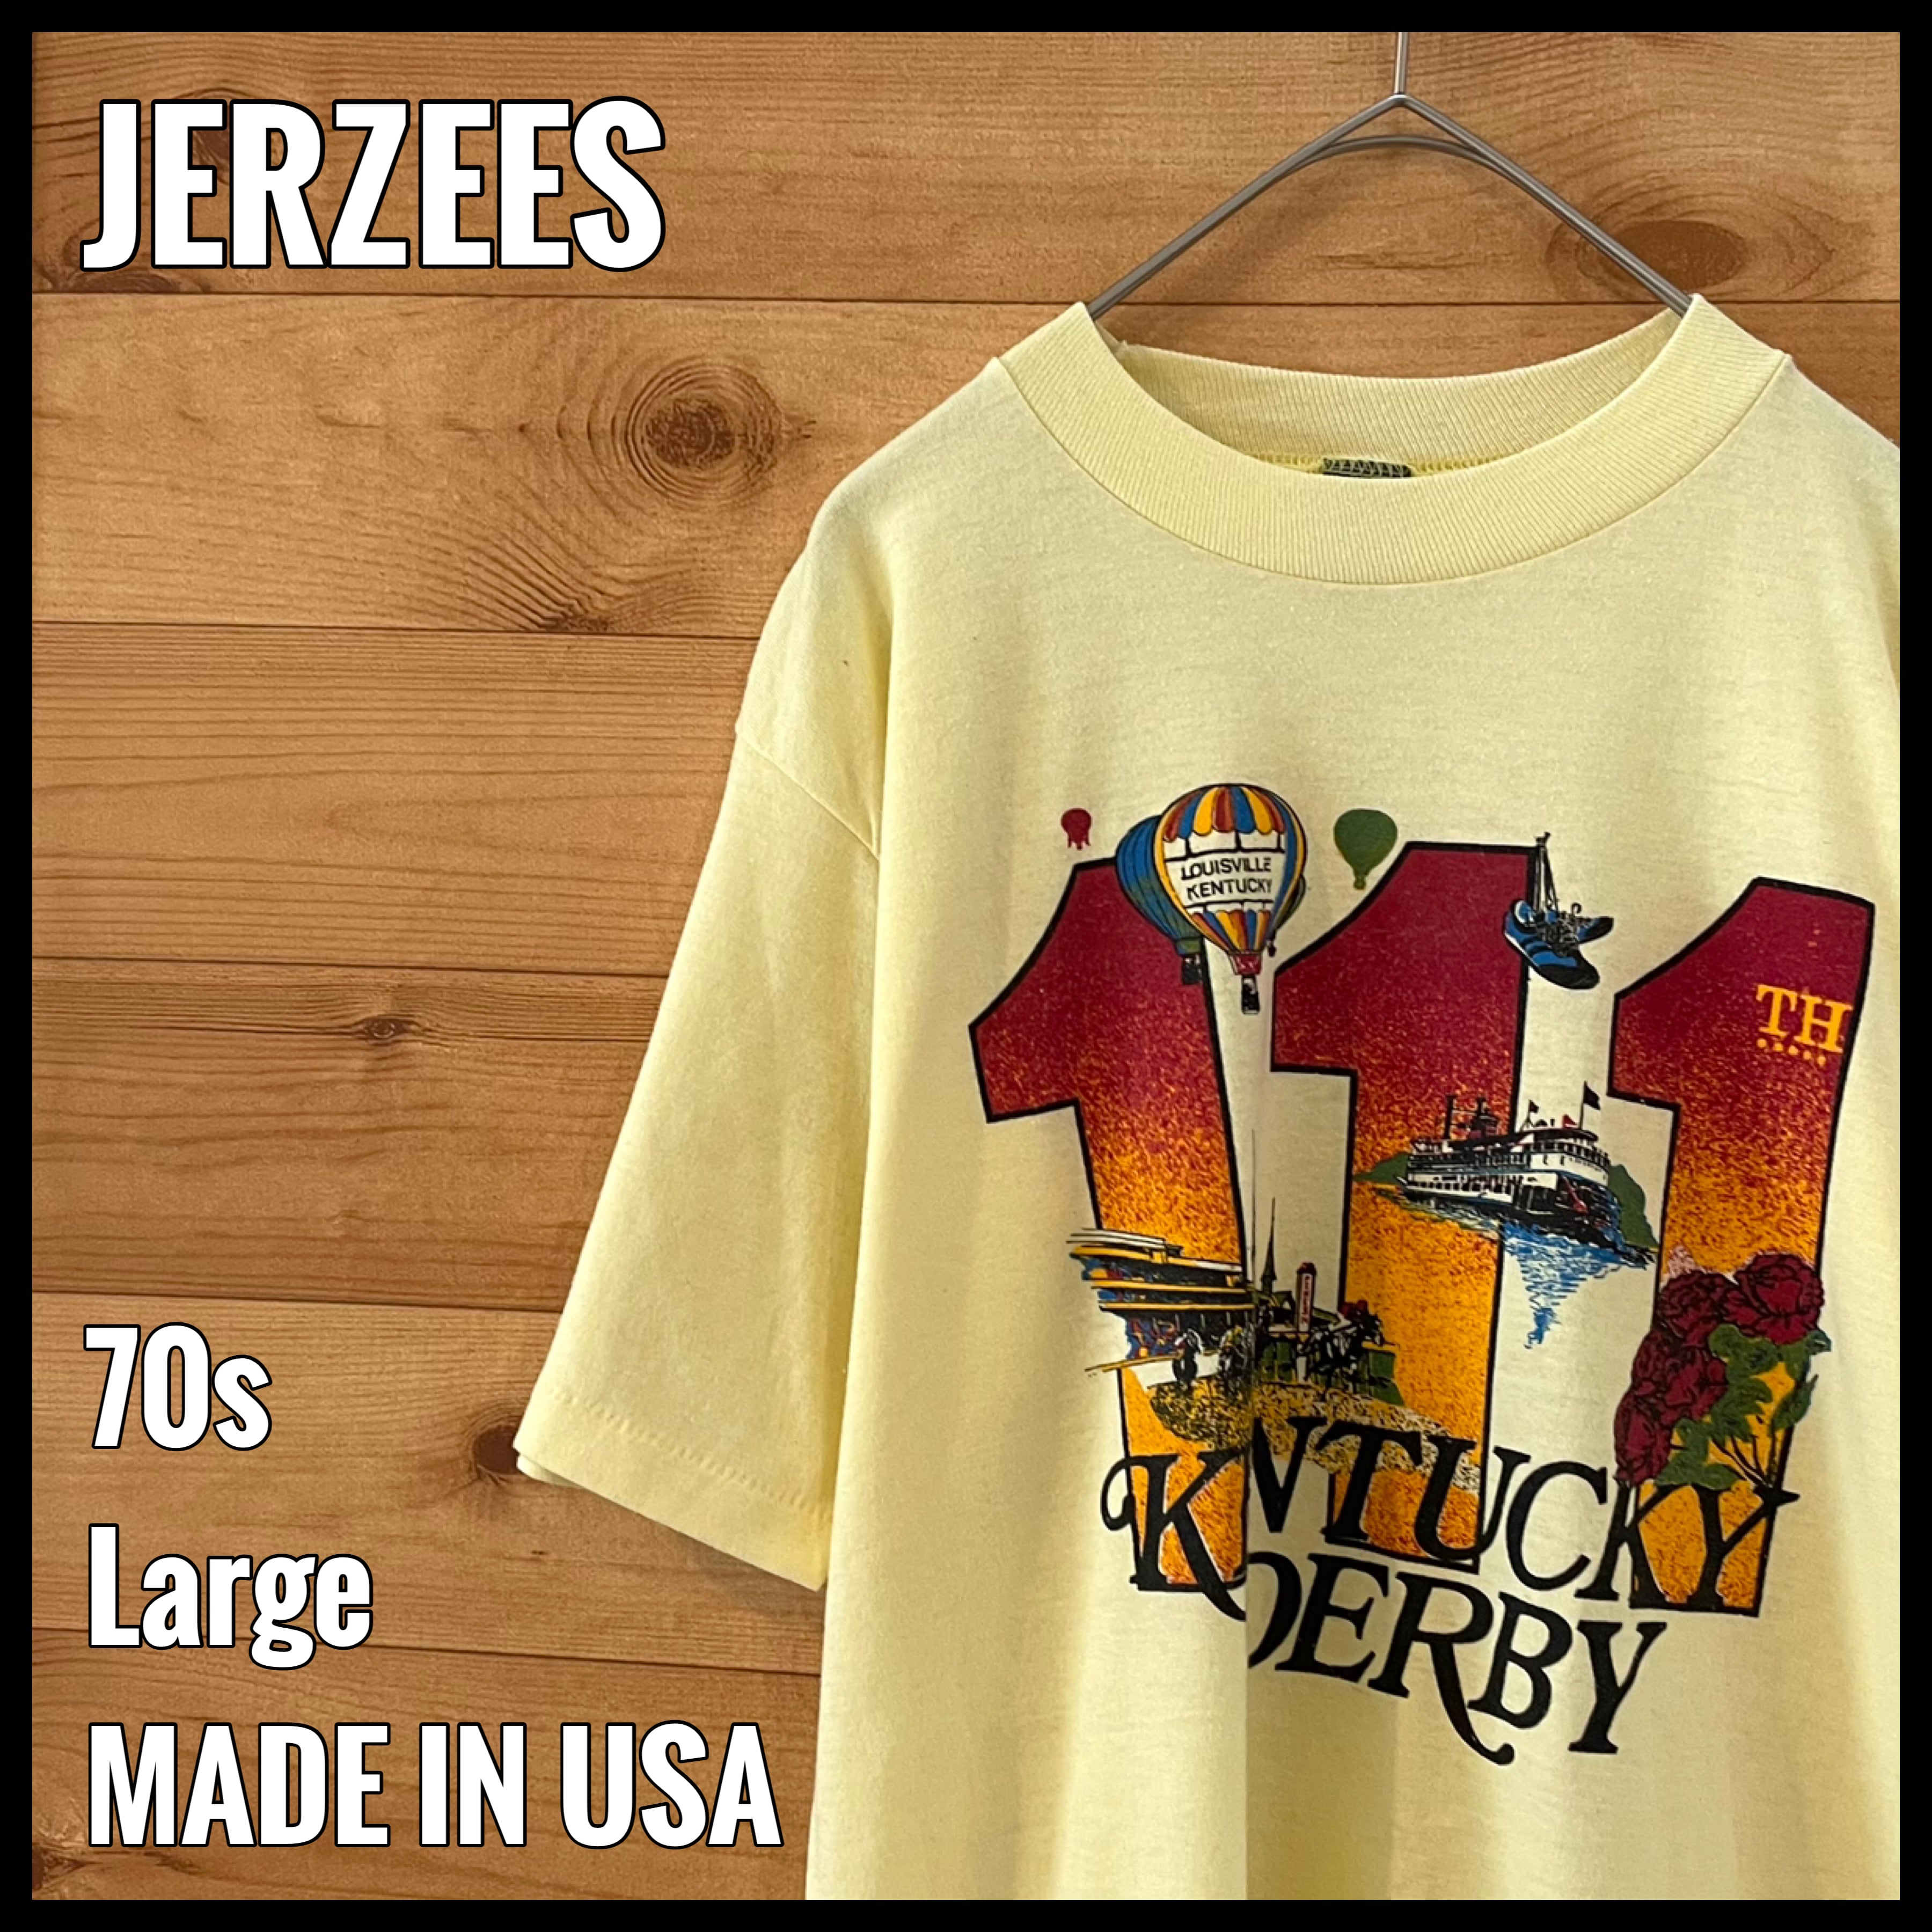 JERZEES】70s USA製 Tシャツ 初期タグ プリント ケンタッキーダービー ...